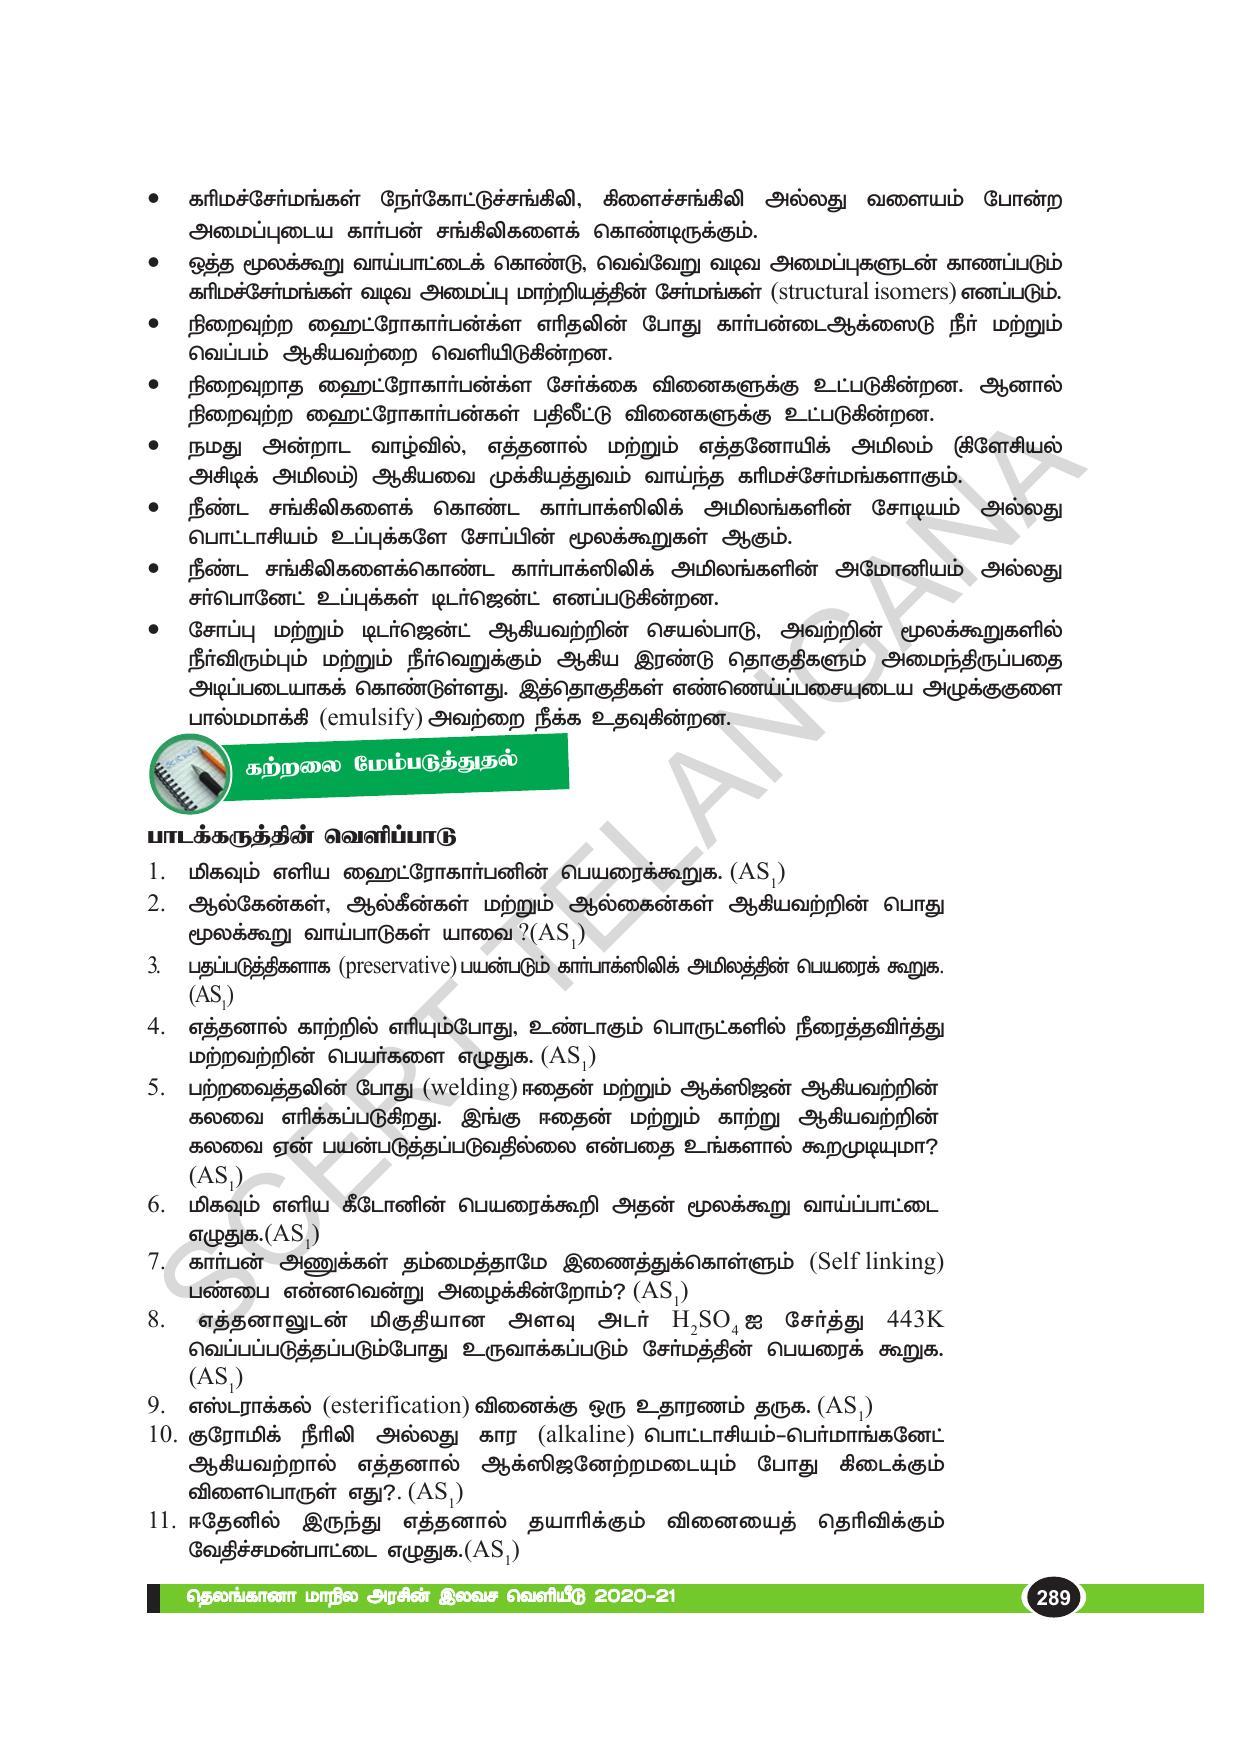 TS SCERT Class 10 Physical Science(Tamil Medium) Text Book - Page 301